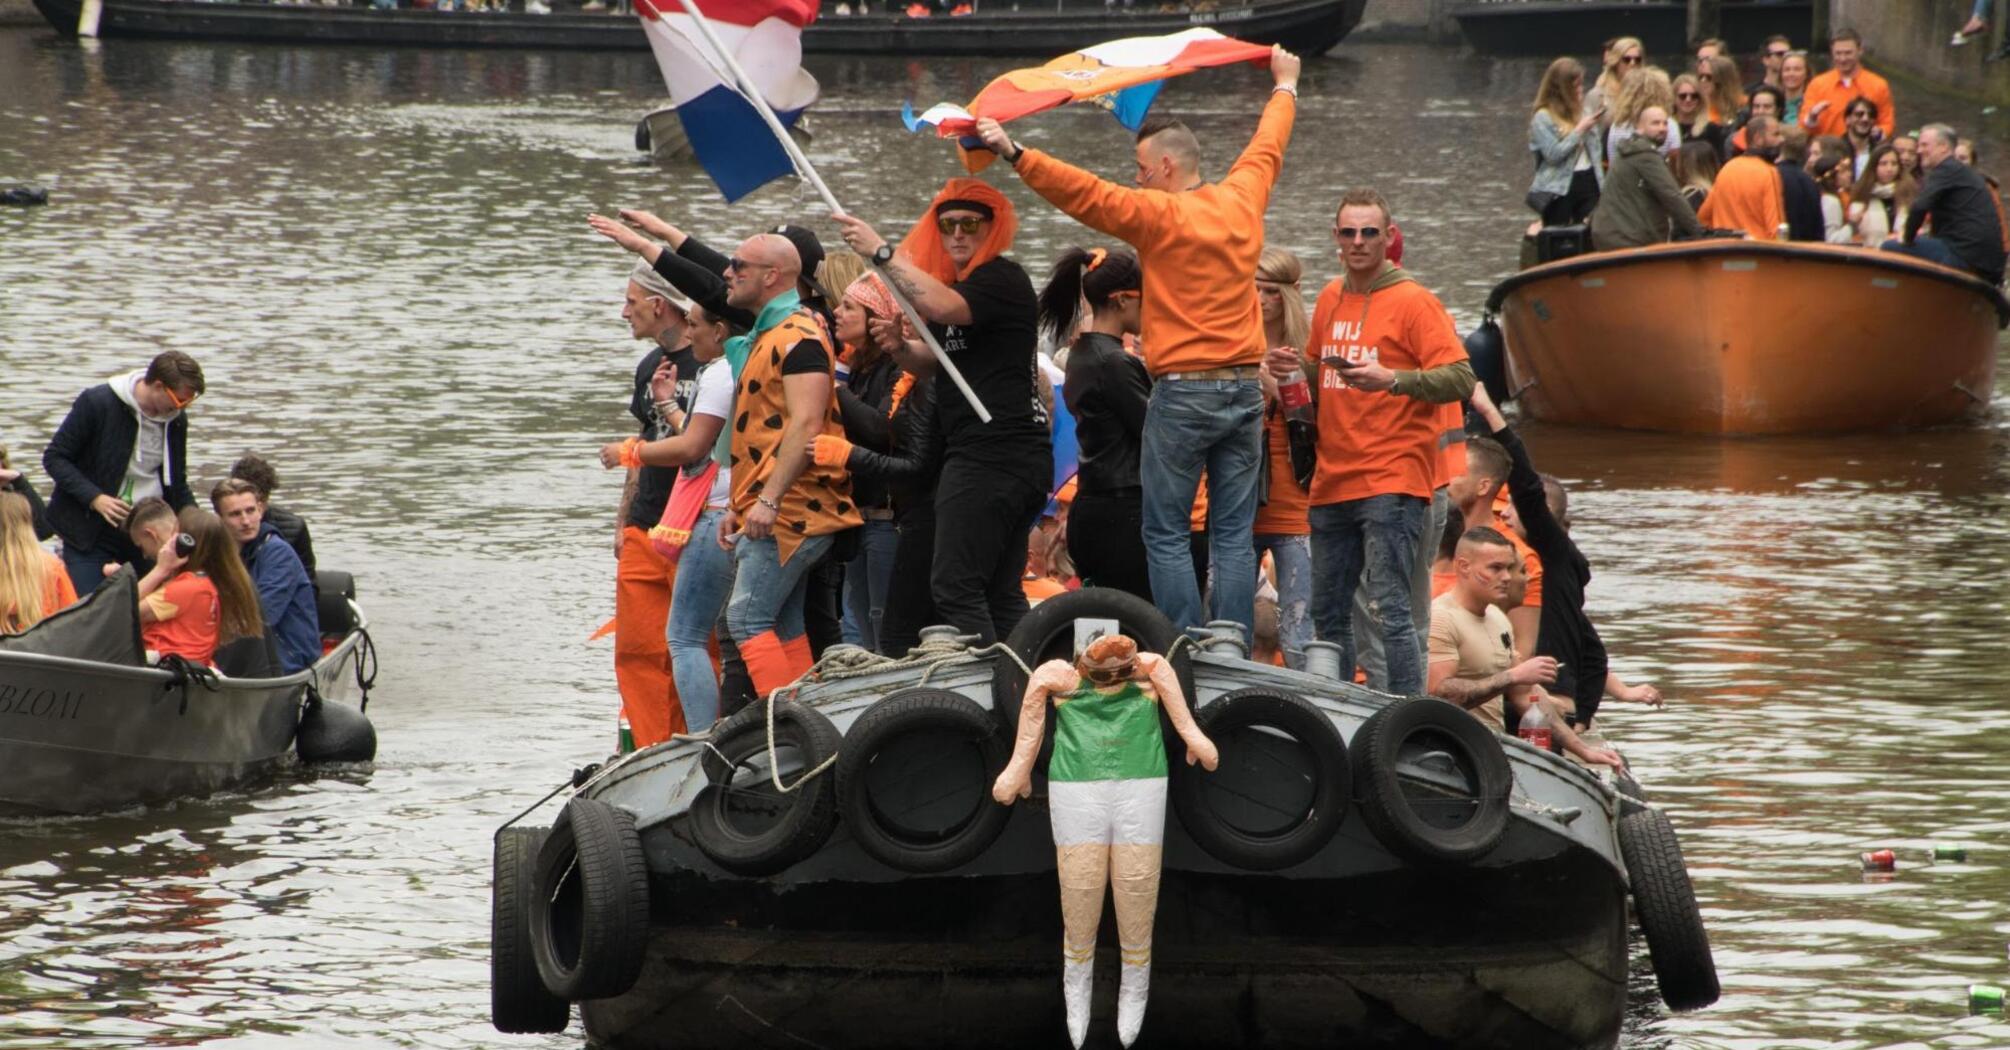 Three boats with people on the river in orange clothes